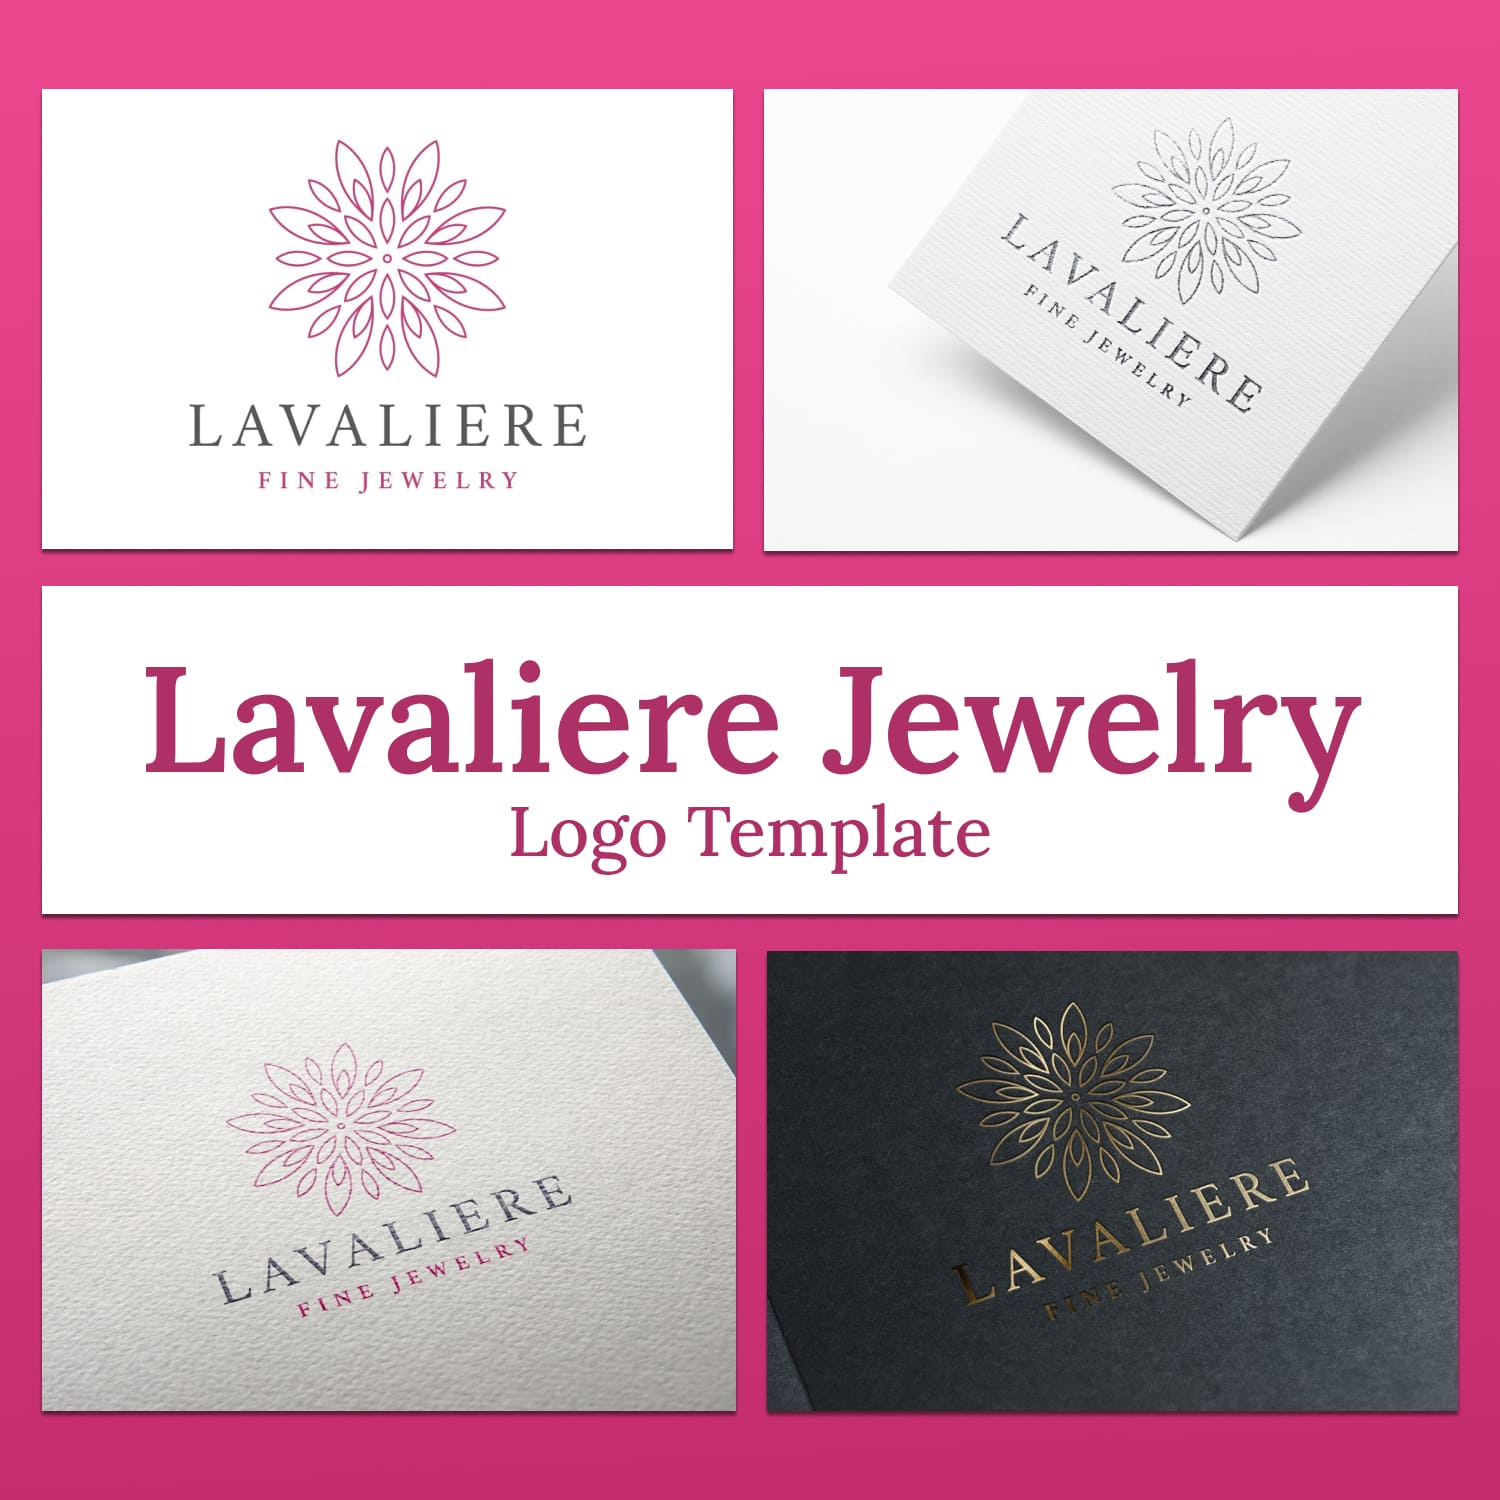 Lavaliere Jewelry Logo Design Template cover image.